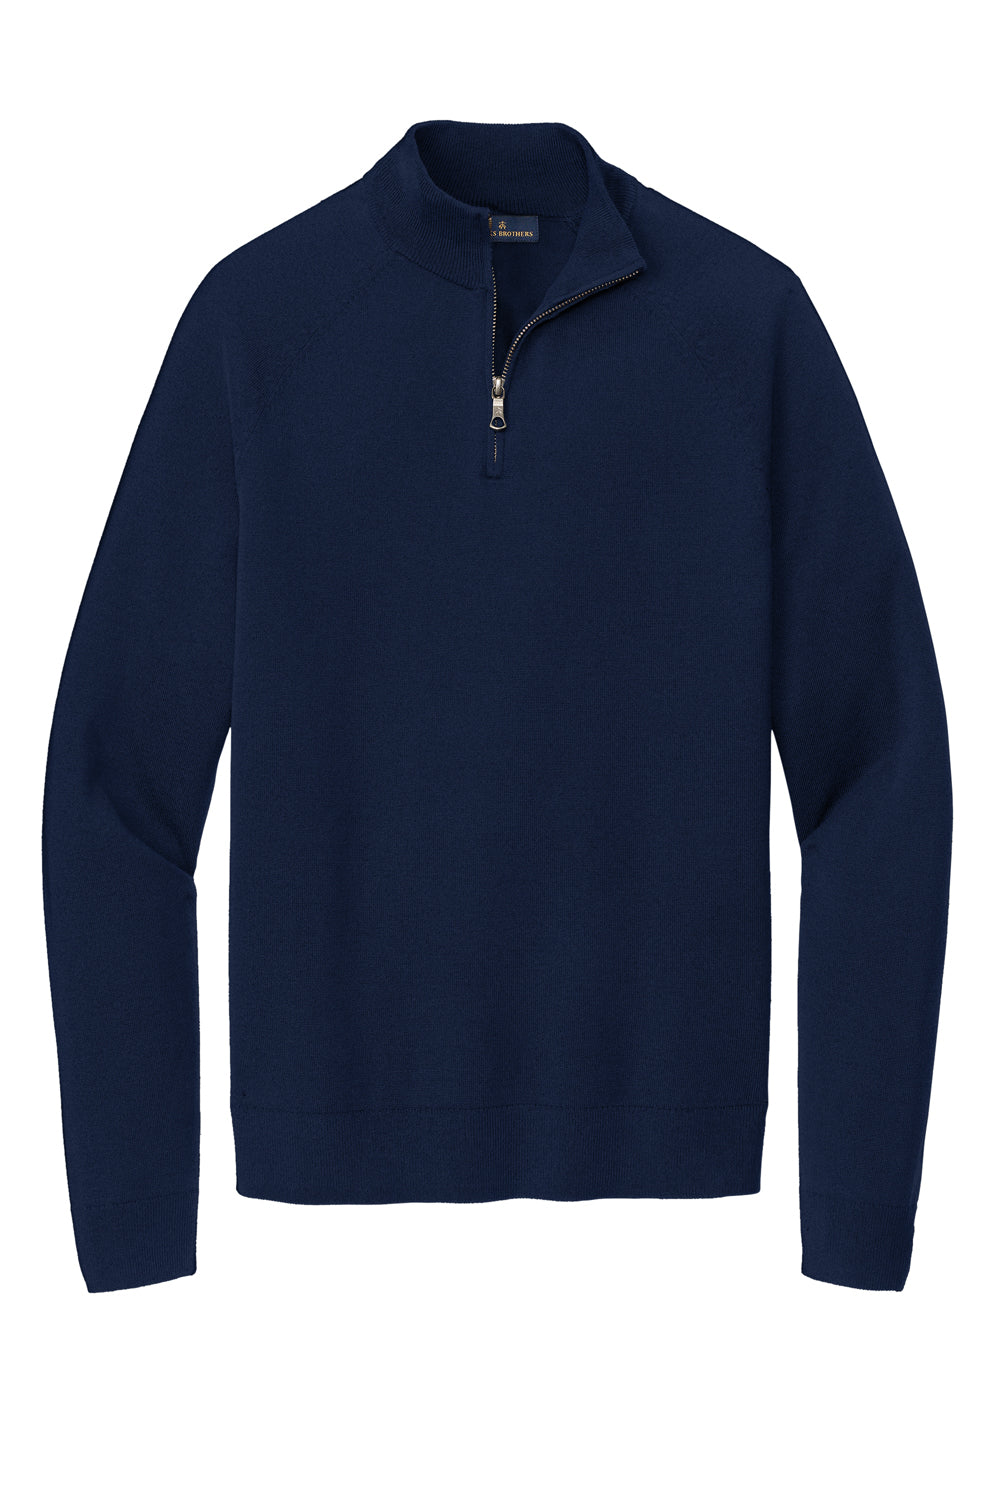 Brooks Brothers Mens Long Sleeve 1/4 Zip Sweater Navy Blue Flat Front